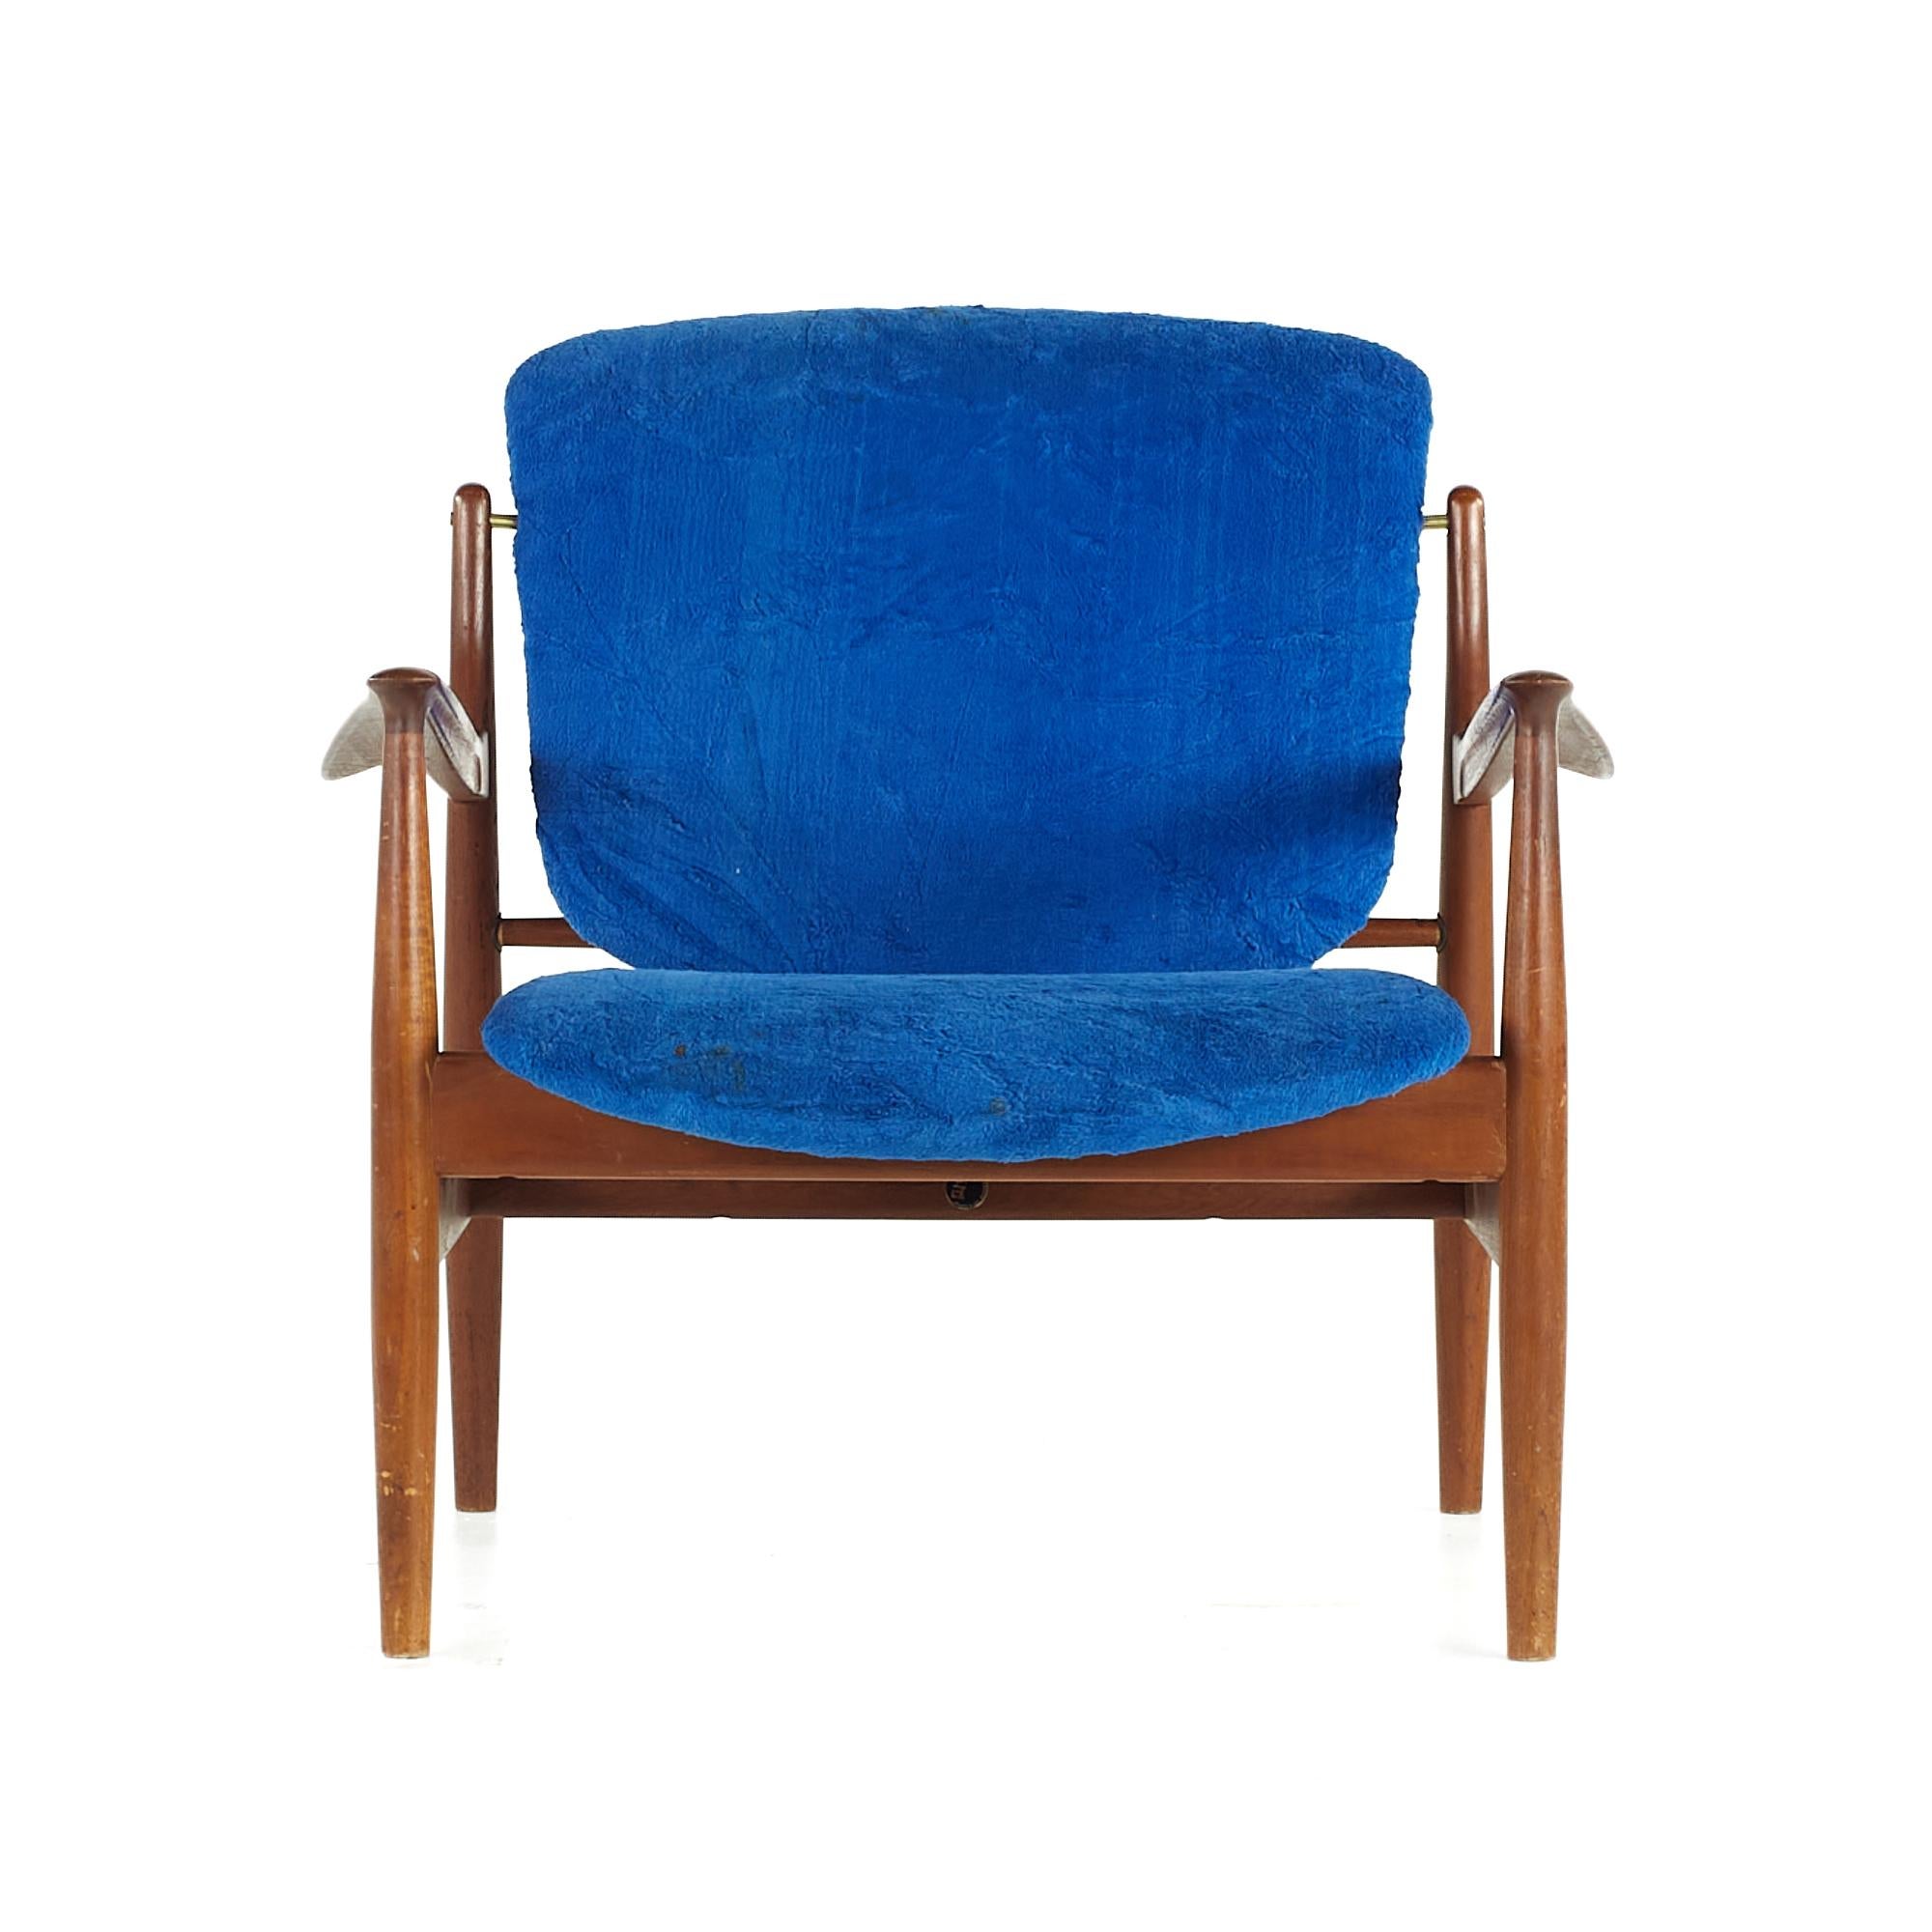 Finn Juhl Midcentury FJ136 Teak Lounge Chairs, Pair In Good Condition For Sale In Countryside, IL